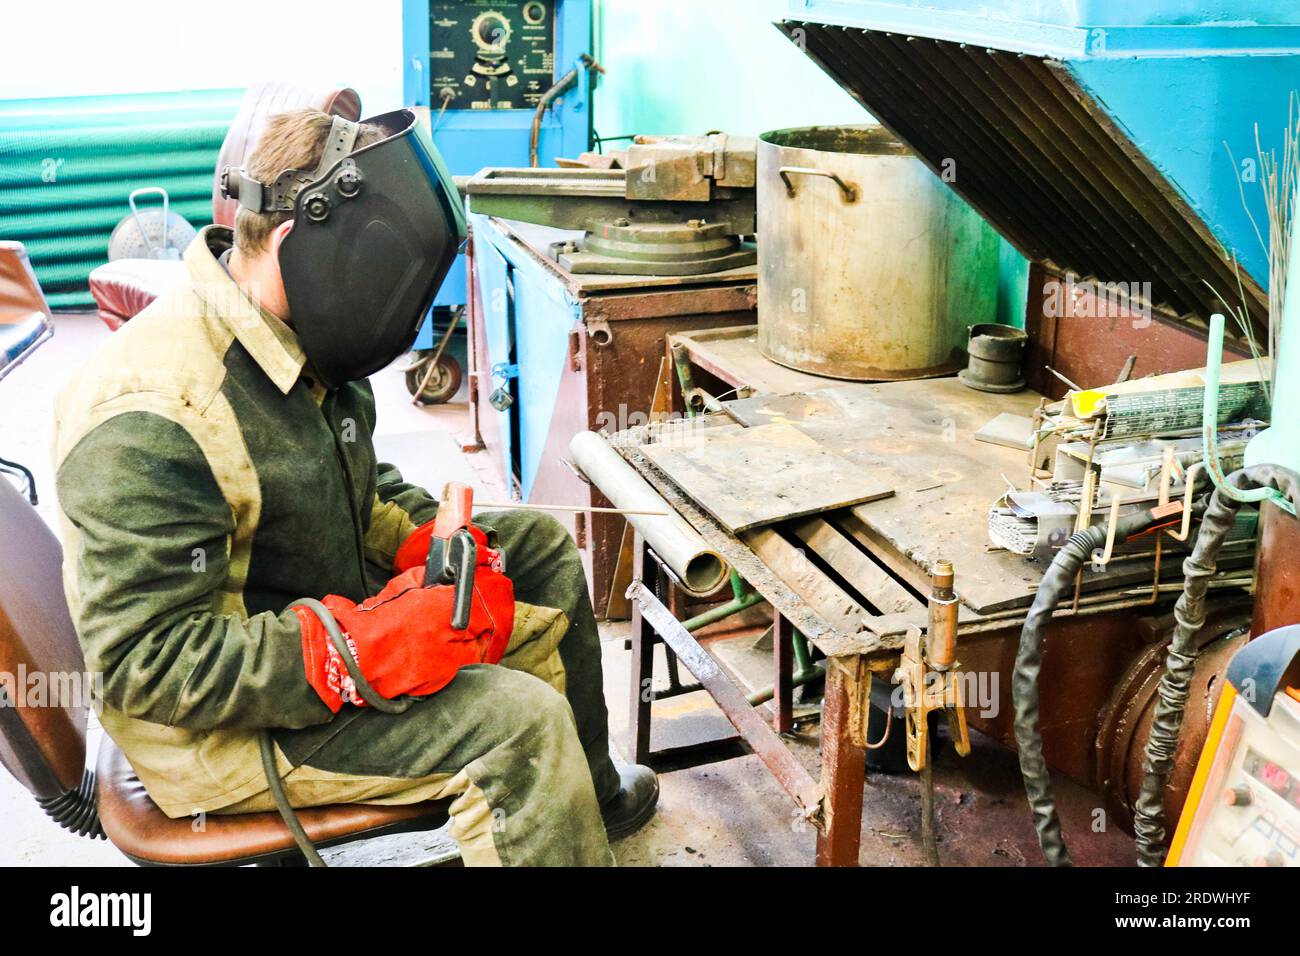 A male worker a welder in a protective mask welds a metal pipe at a welding station in a workshop at a metallurgical plant in a repair facility. Stock Photo